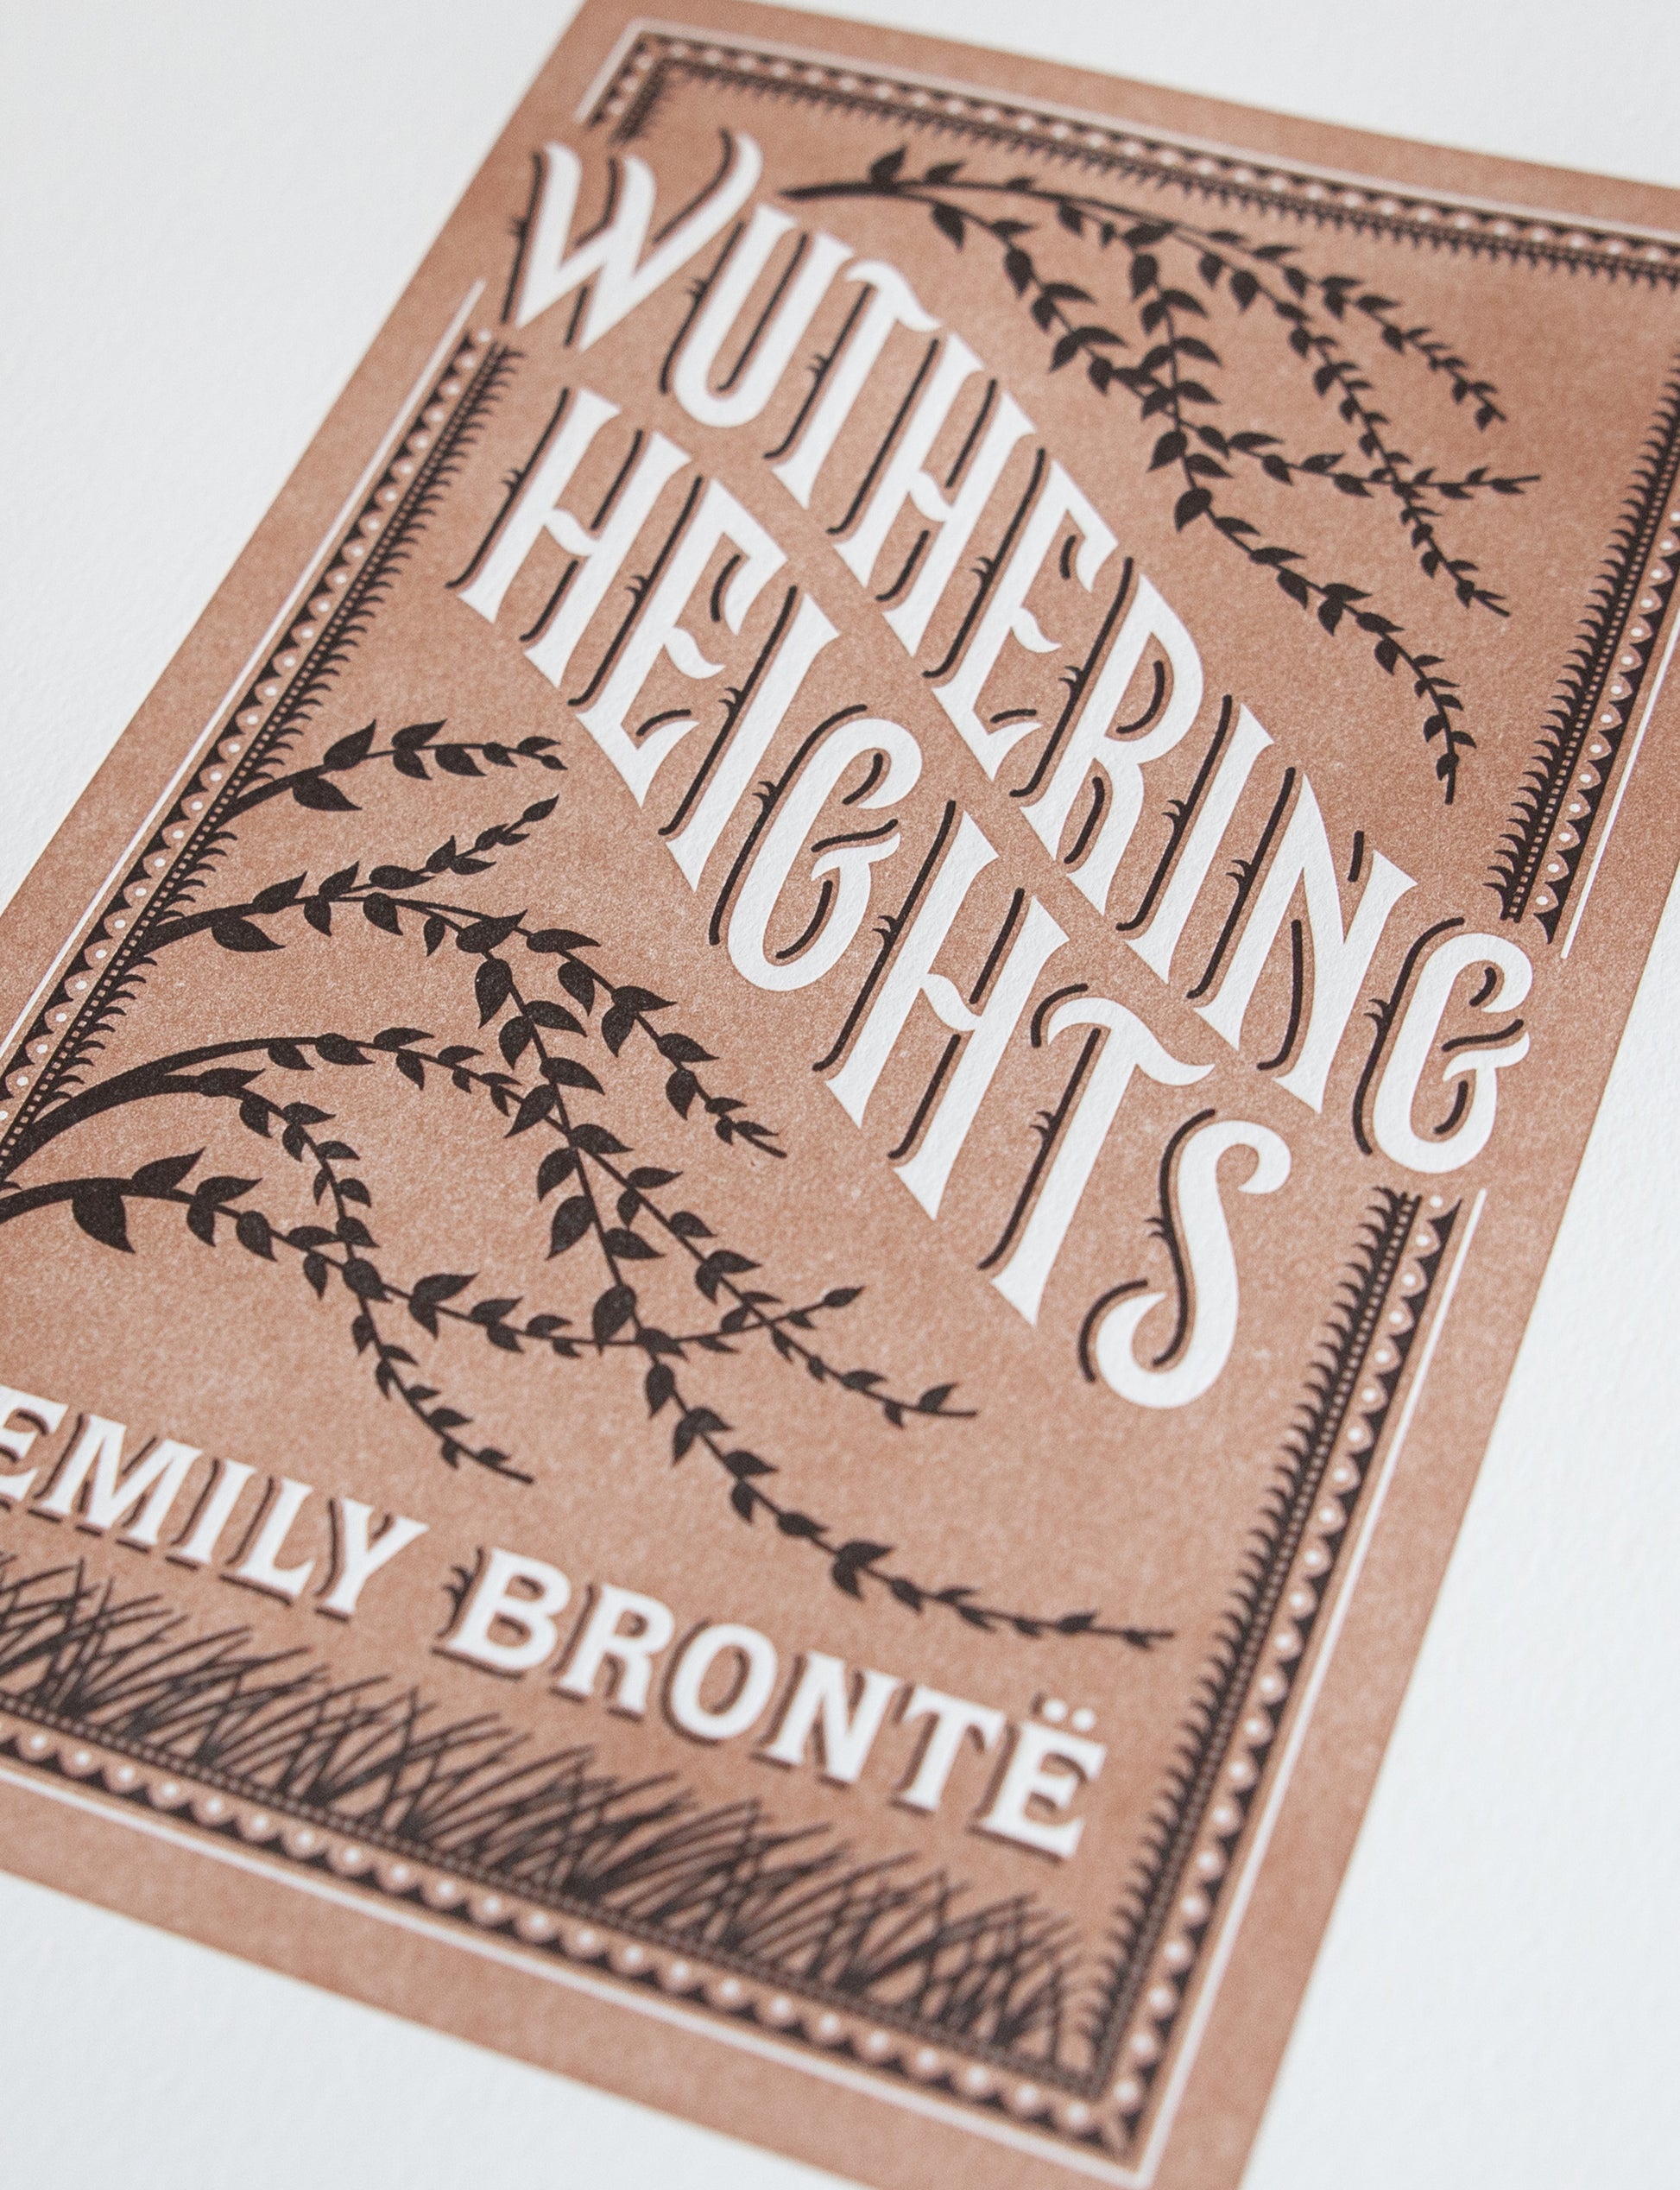 Close-up of a 2-color letterpress print in brown and black. Printed artwork is an illustrated book cover of Wuthering Heights including custom hand lettering.